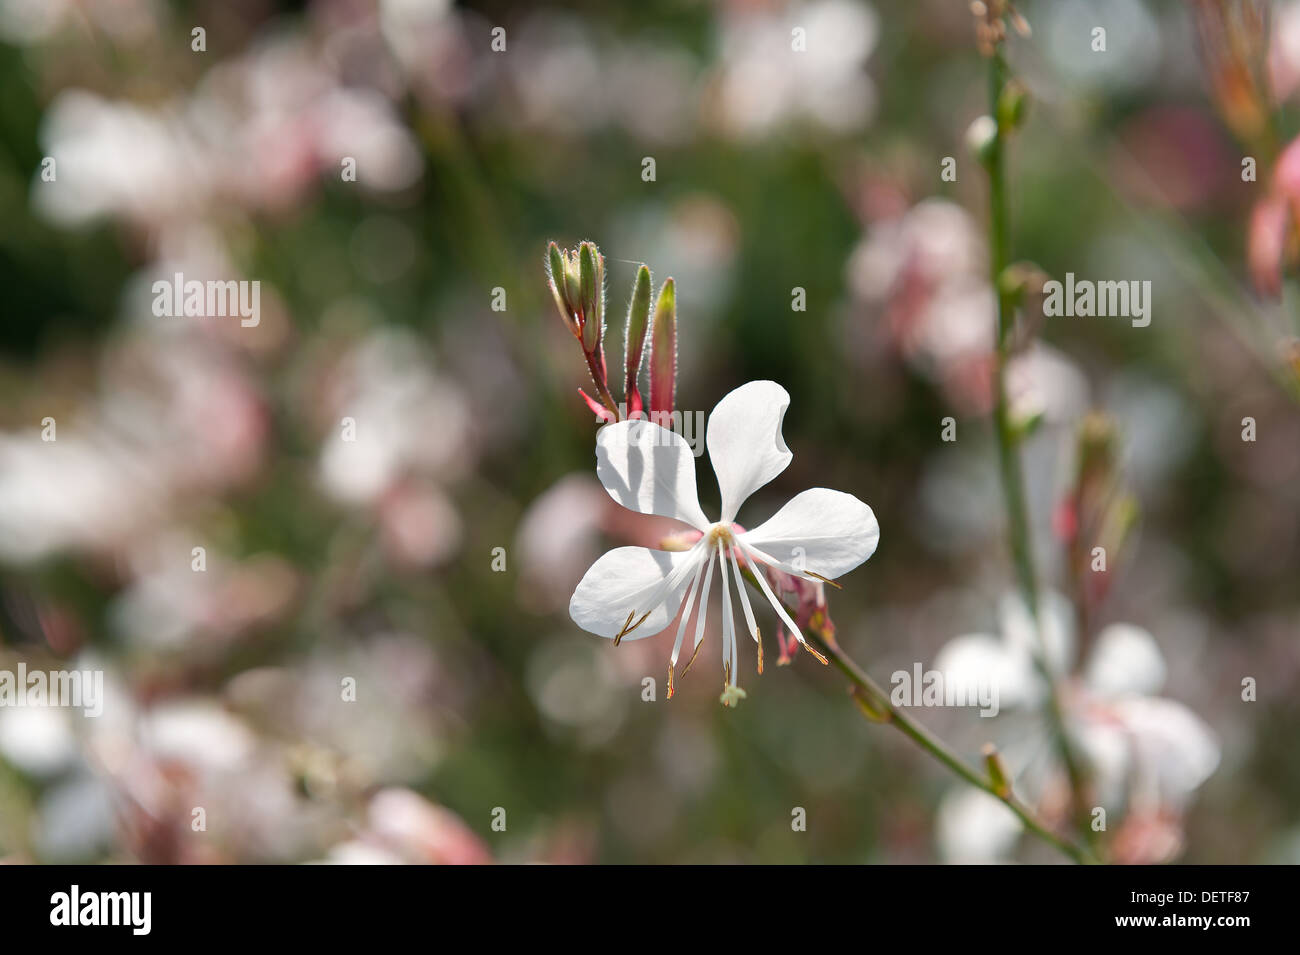 Starry flowers of Gaura lindheimeri with long anthers on summer day Stock Photo